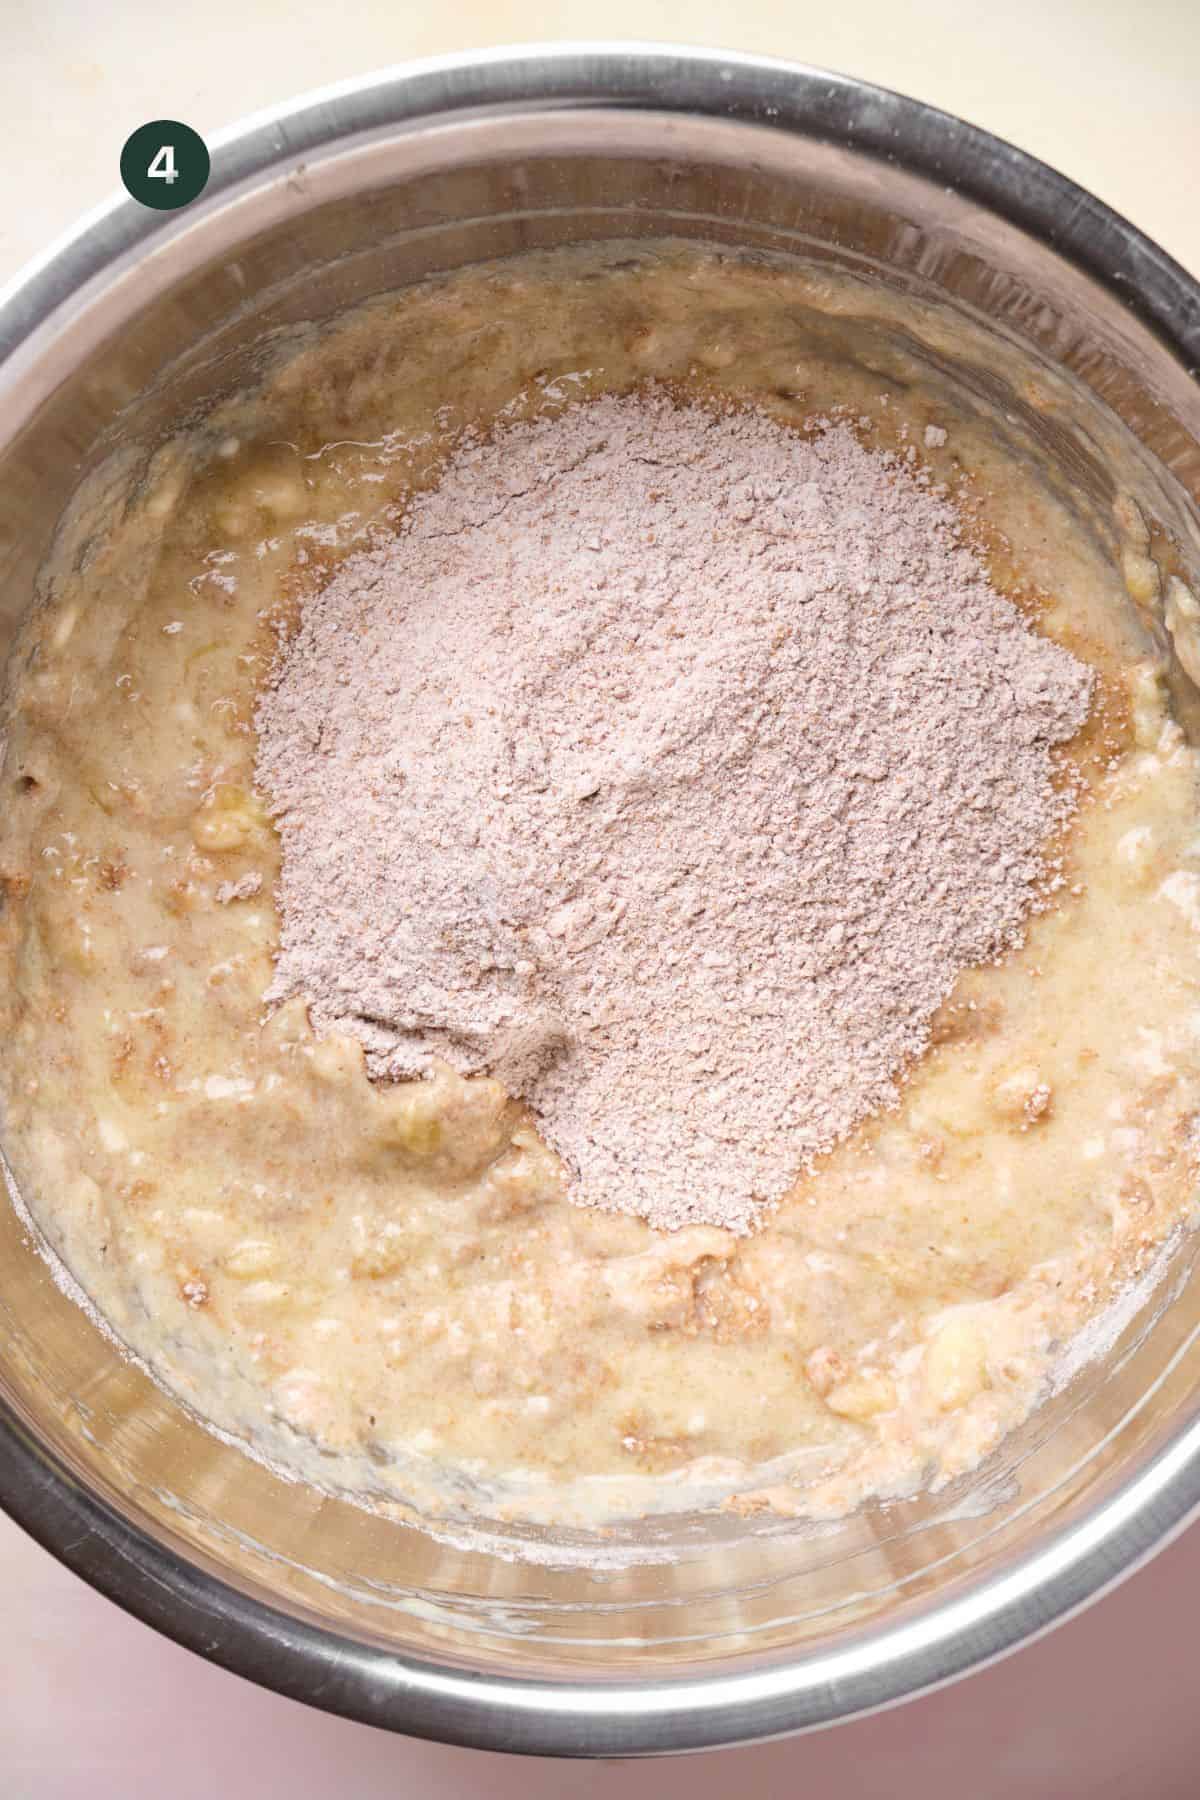 Dry ingredients gradually added to the wet. 